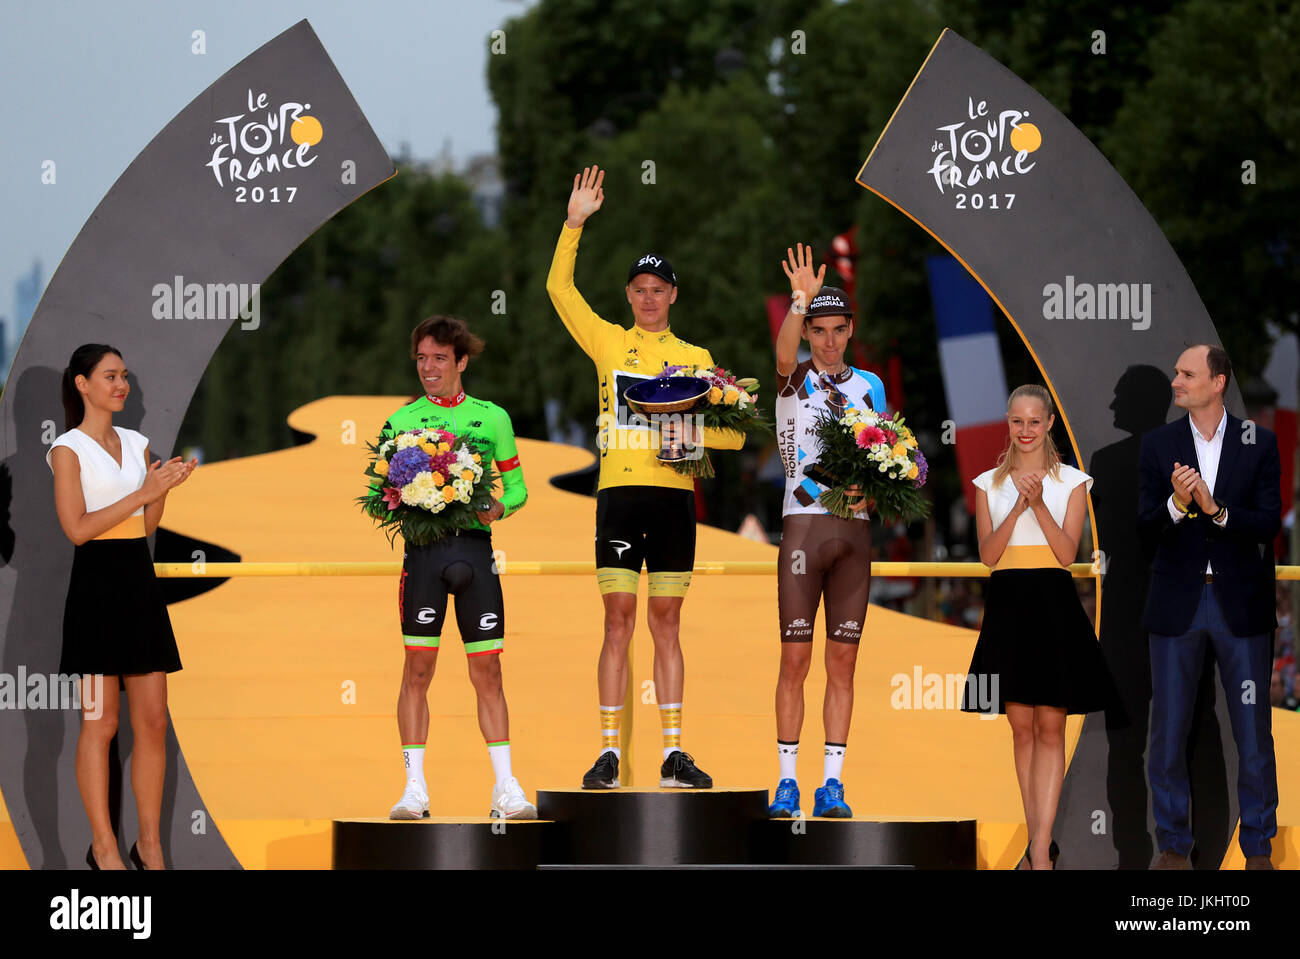 Team Sky's Chris Froome (centre) celebrates on the podium next to second place Cannondale's Rigoberto Uran (left) and third place AG2R La Mondiale's Romain Bardet (right) during stage 21 of the Tour de France in Paris, France. Stock Photo